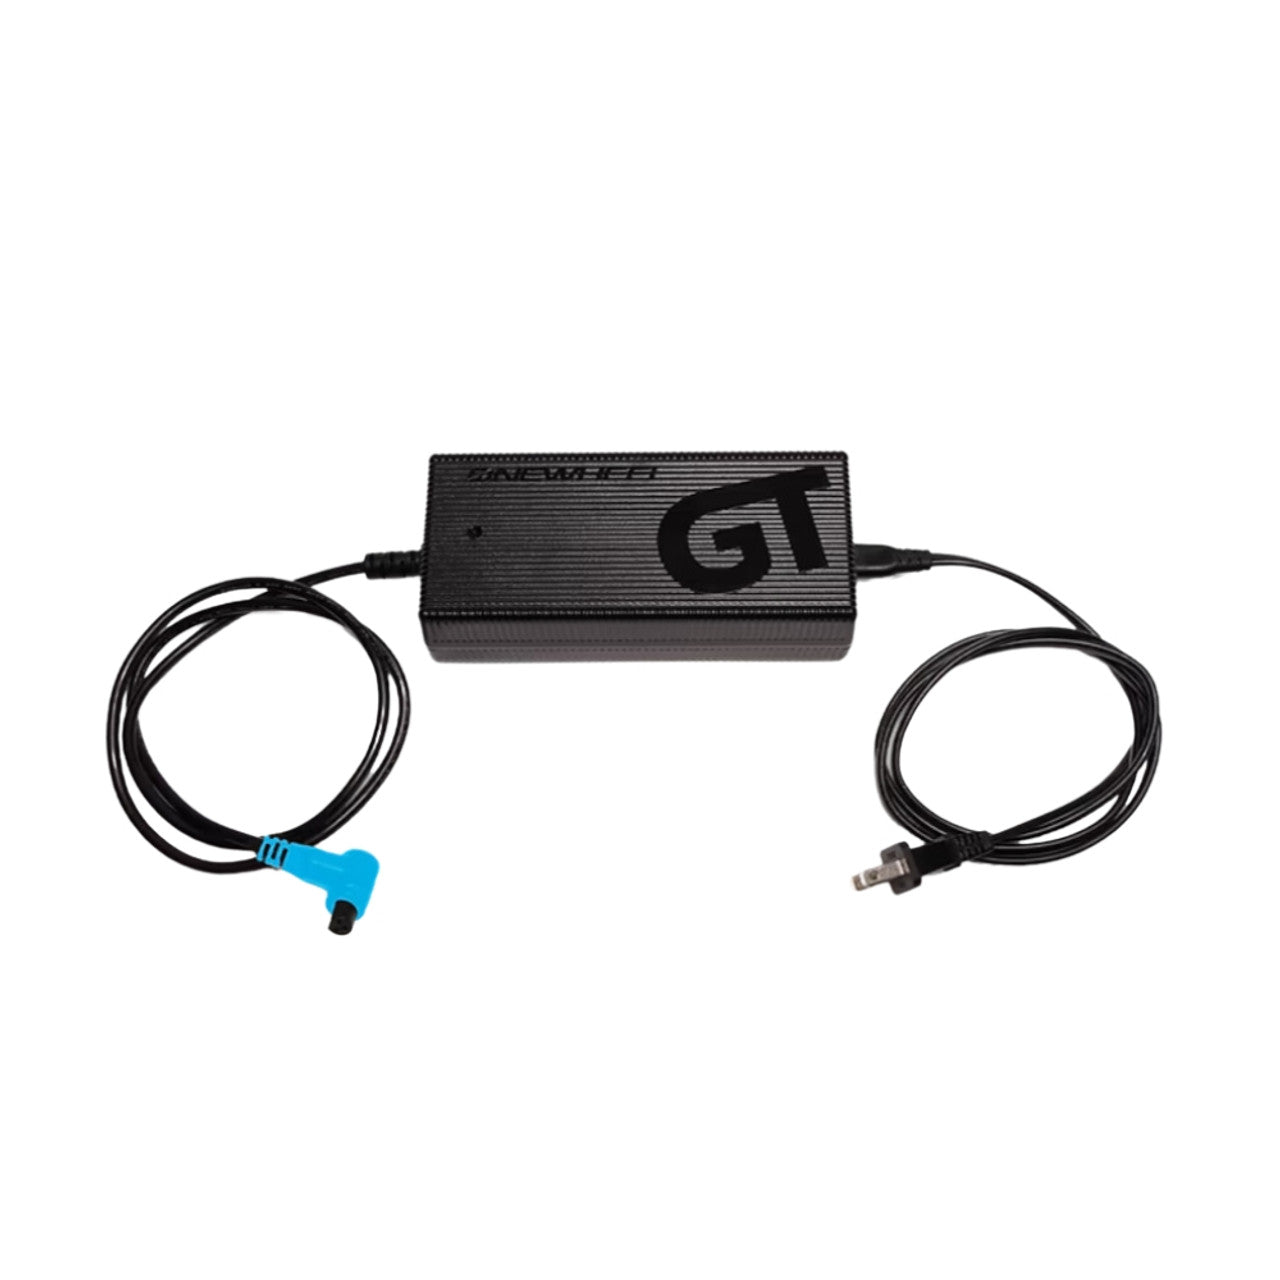 Onewheel Hypercharger For GT-S Series Onewheel Accessory